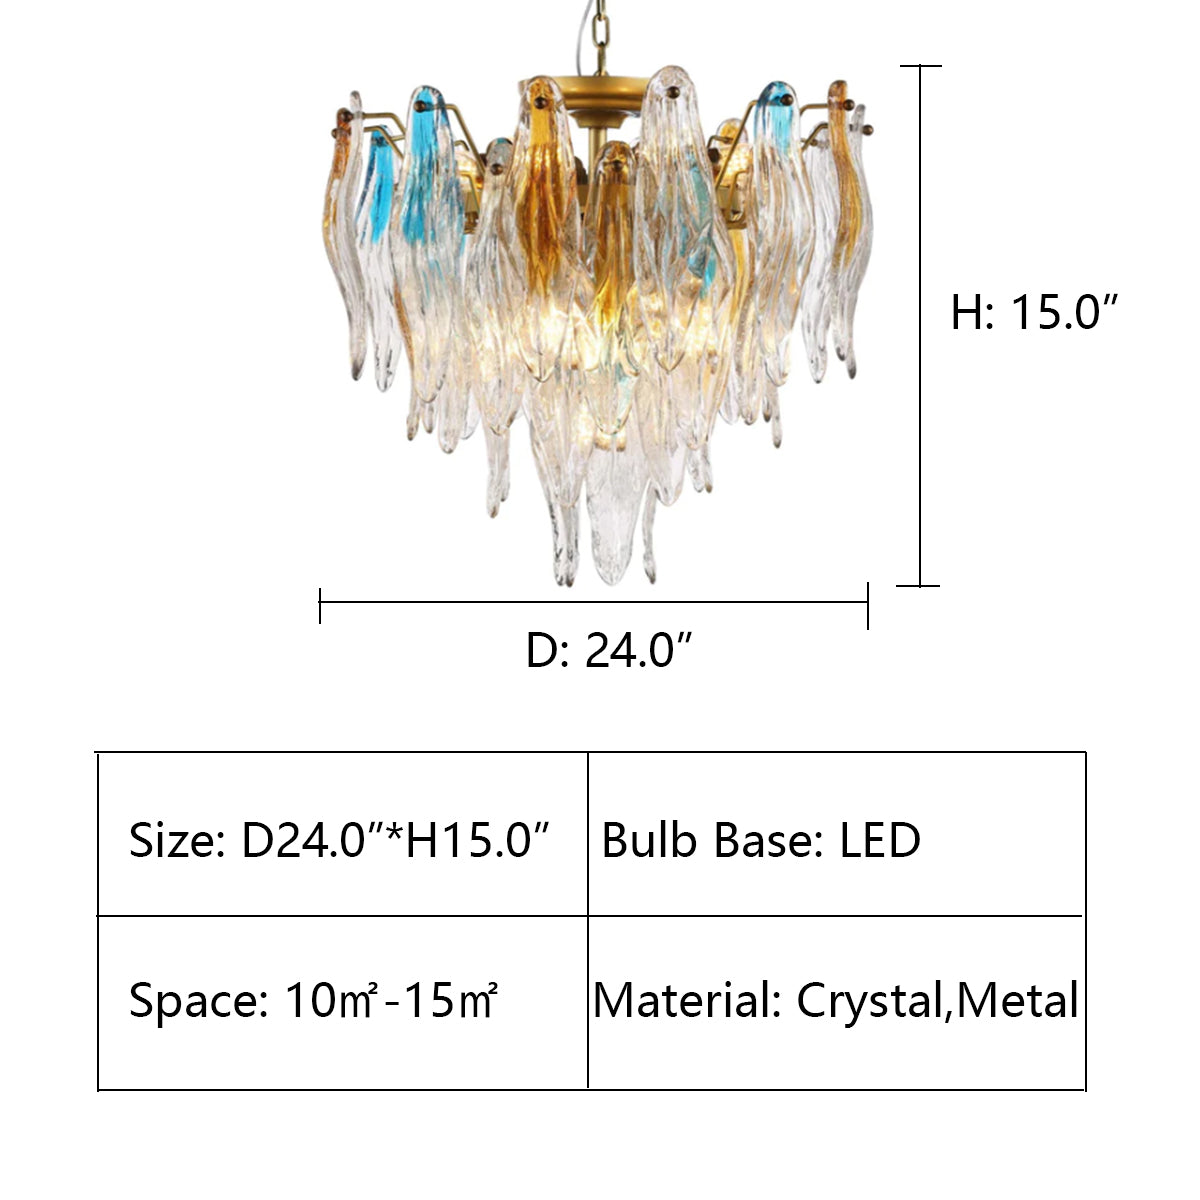 D24.0"*H15.0" Lunette Murano Glass Chandelier,chandelier,chandeliers,pendant,crystal,metal,ceiling,gold,colorful,blue,clear,round,rectangle,Modern,creative,art,living room,dining room,bedroom,hallway,entrys,foyer